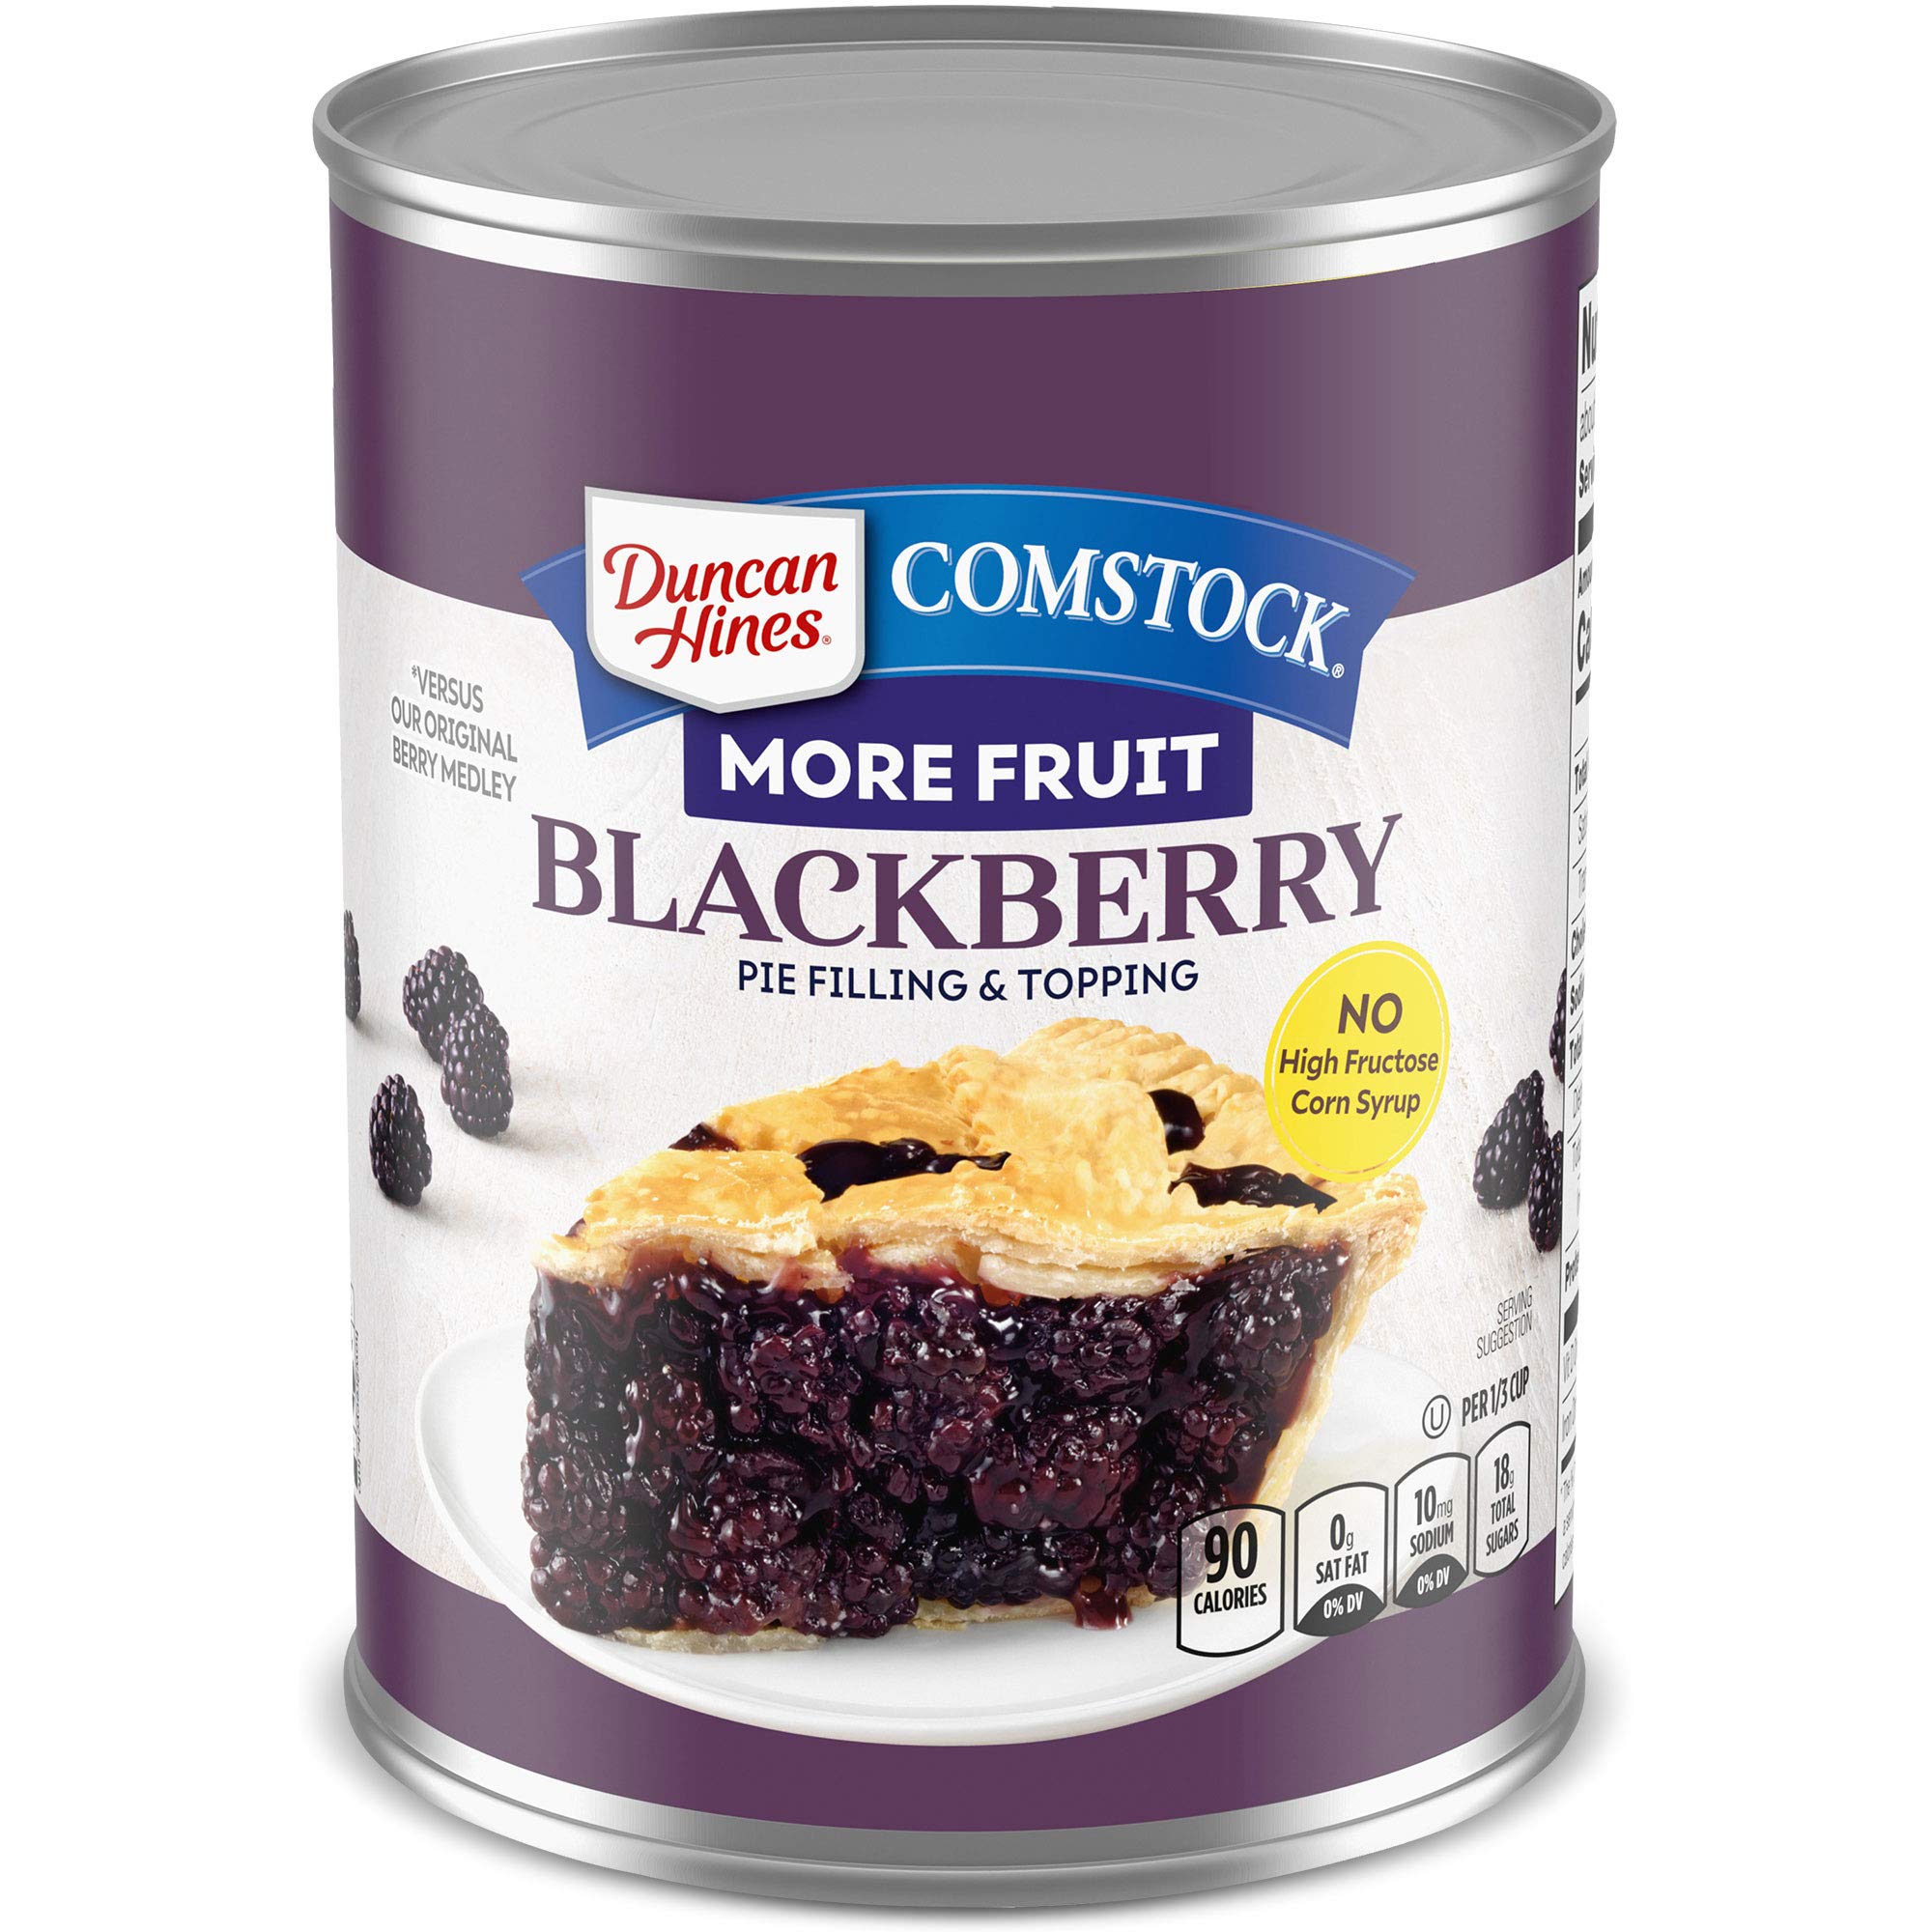 12-Pack 21-Oz Duncan Hines Comstock Premium Fruit Pie Filling & Topping (Blackberry) $16.10 w/ S&S + Free Shipping w/ Prime or on $35+